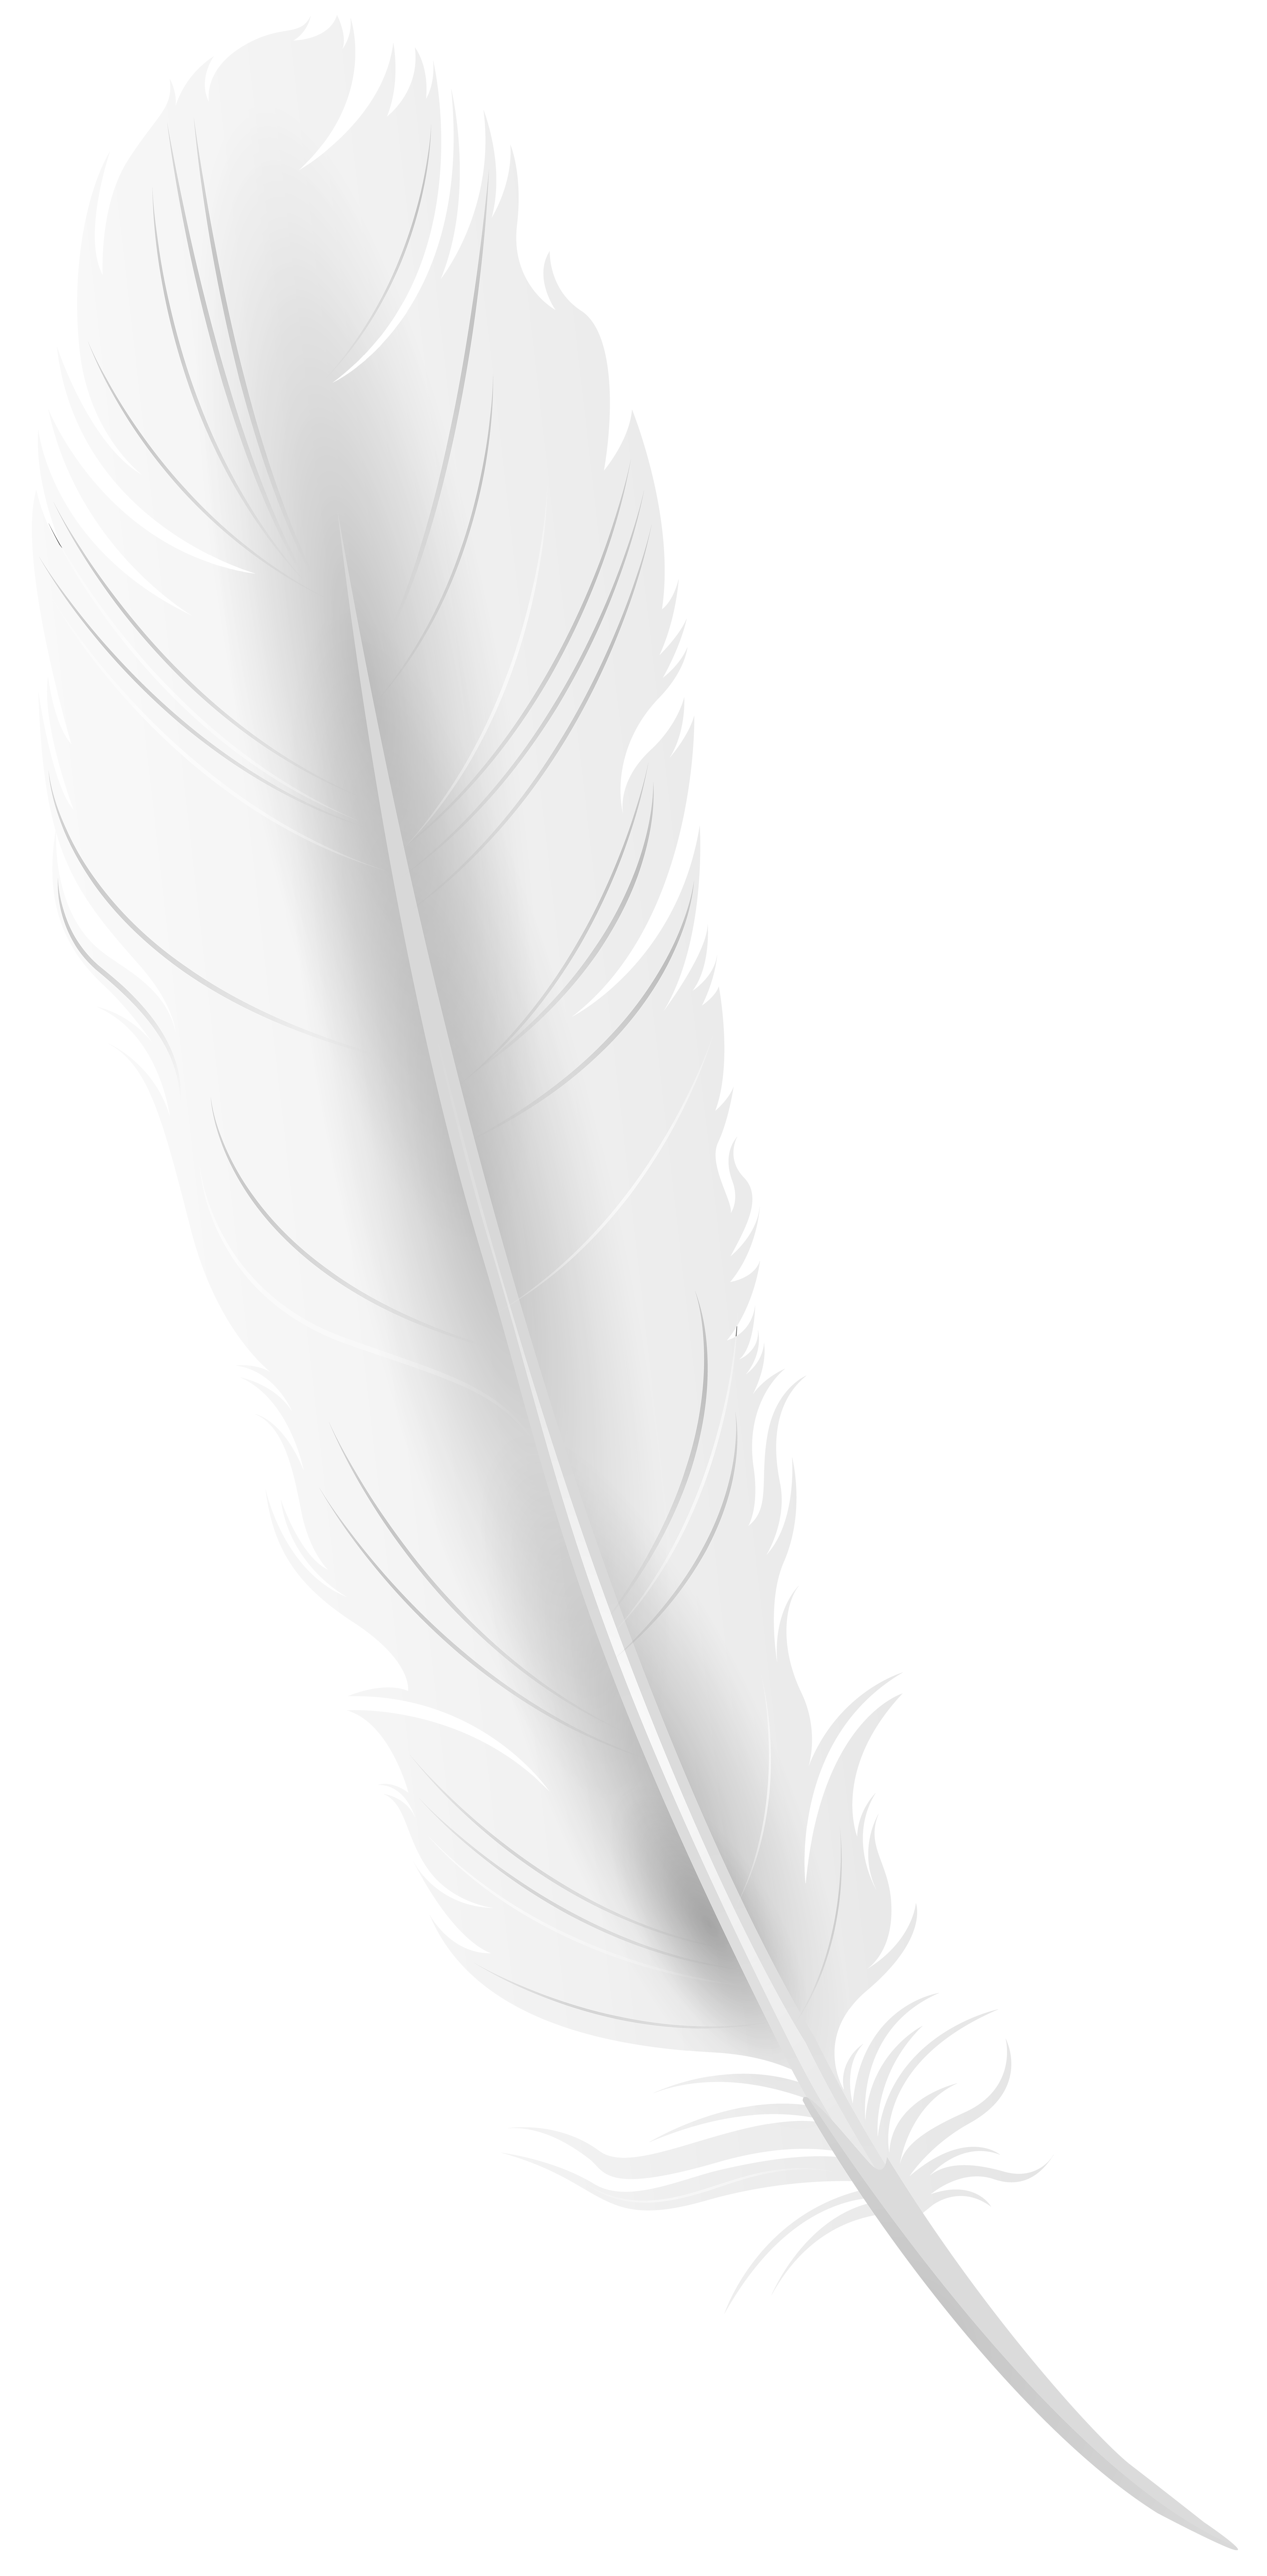 Feather white image PNG